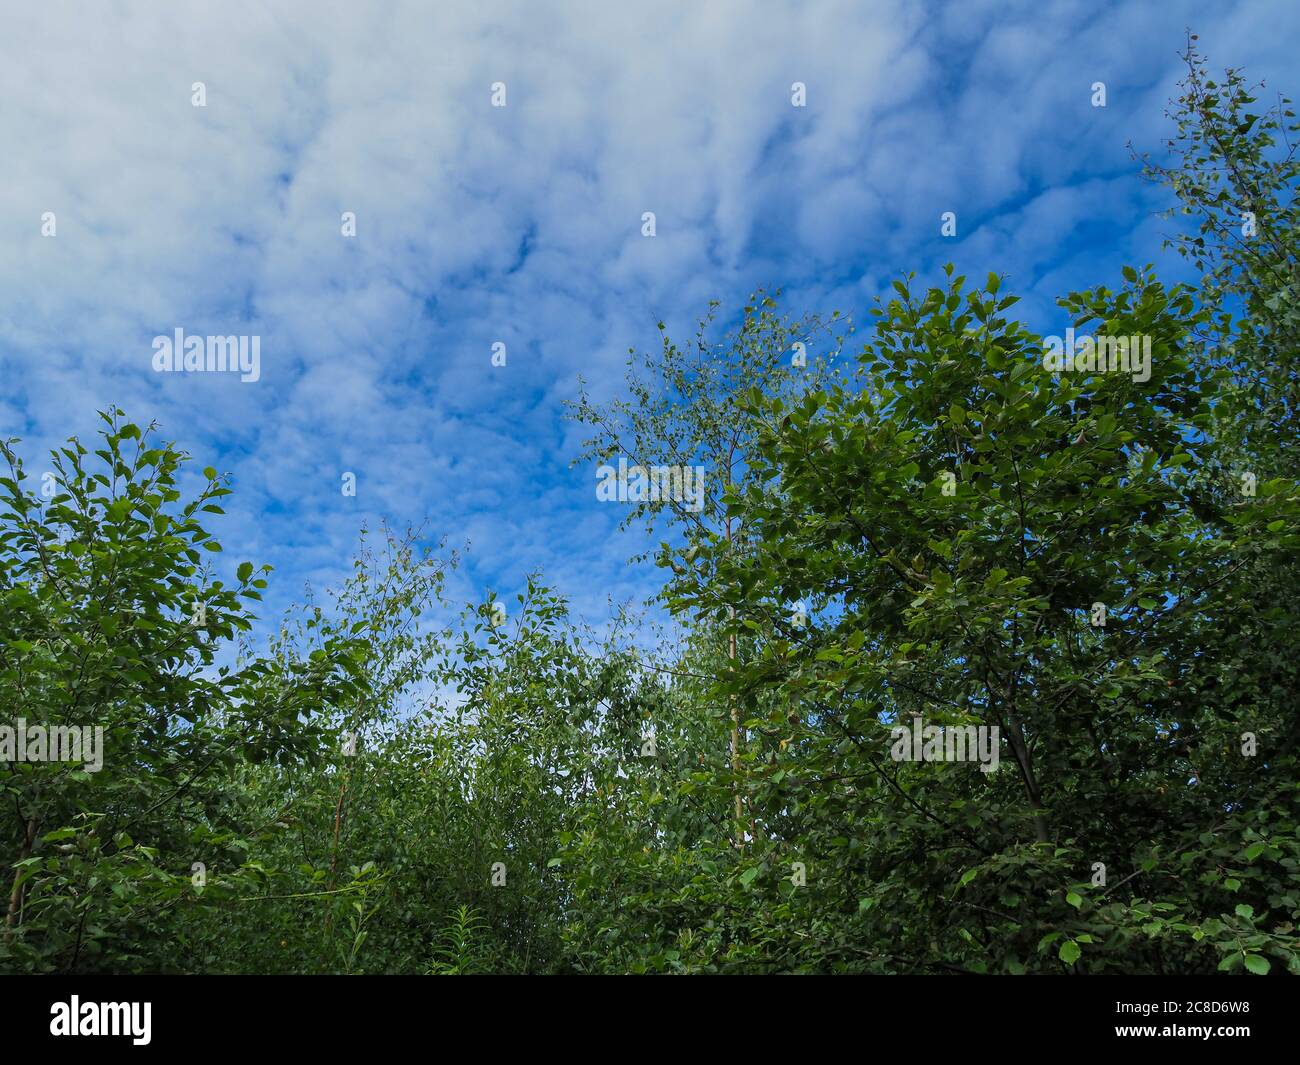 Trees wih green summer leaves and a blue sky with white clouds Stock Photo